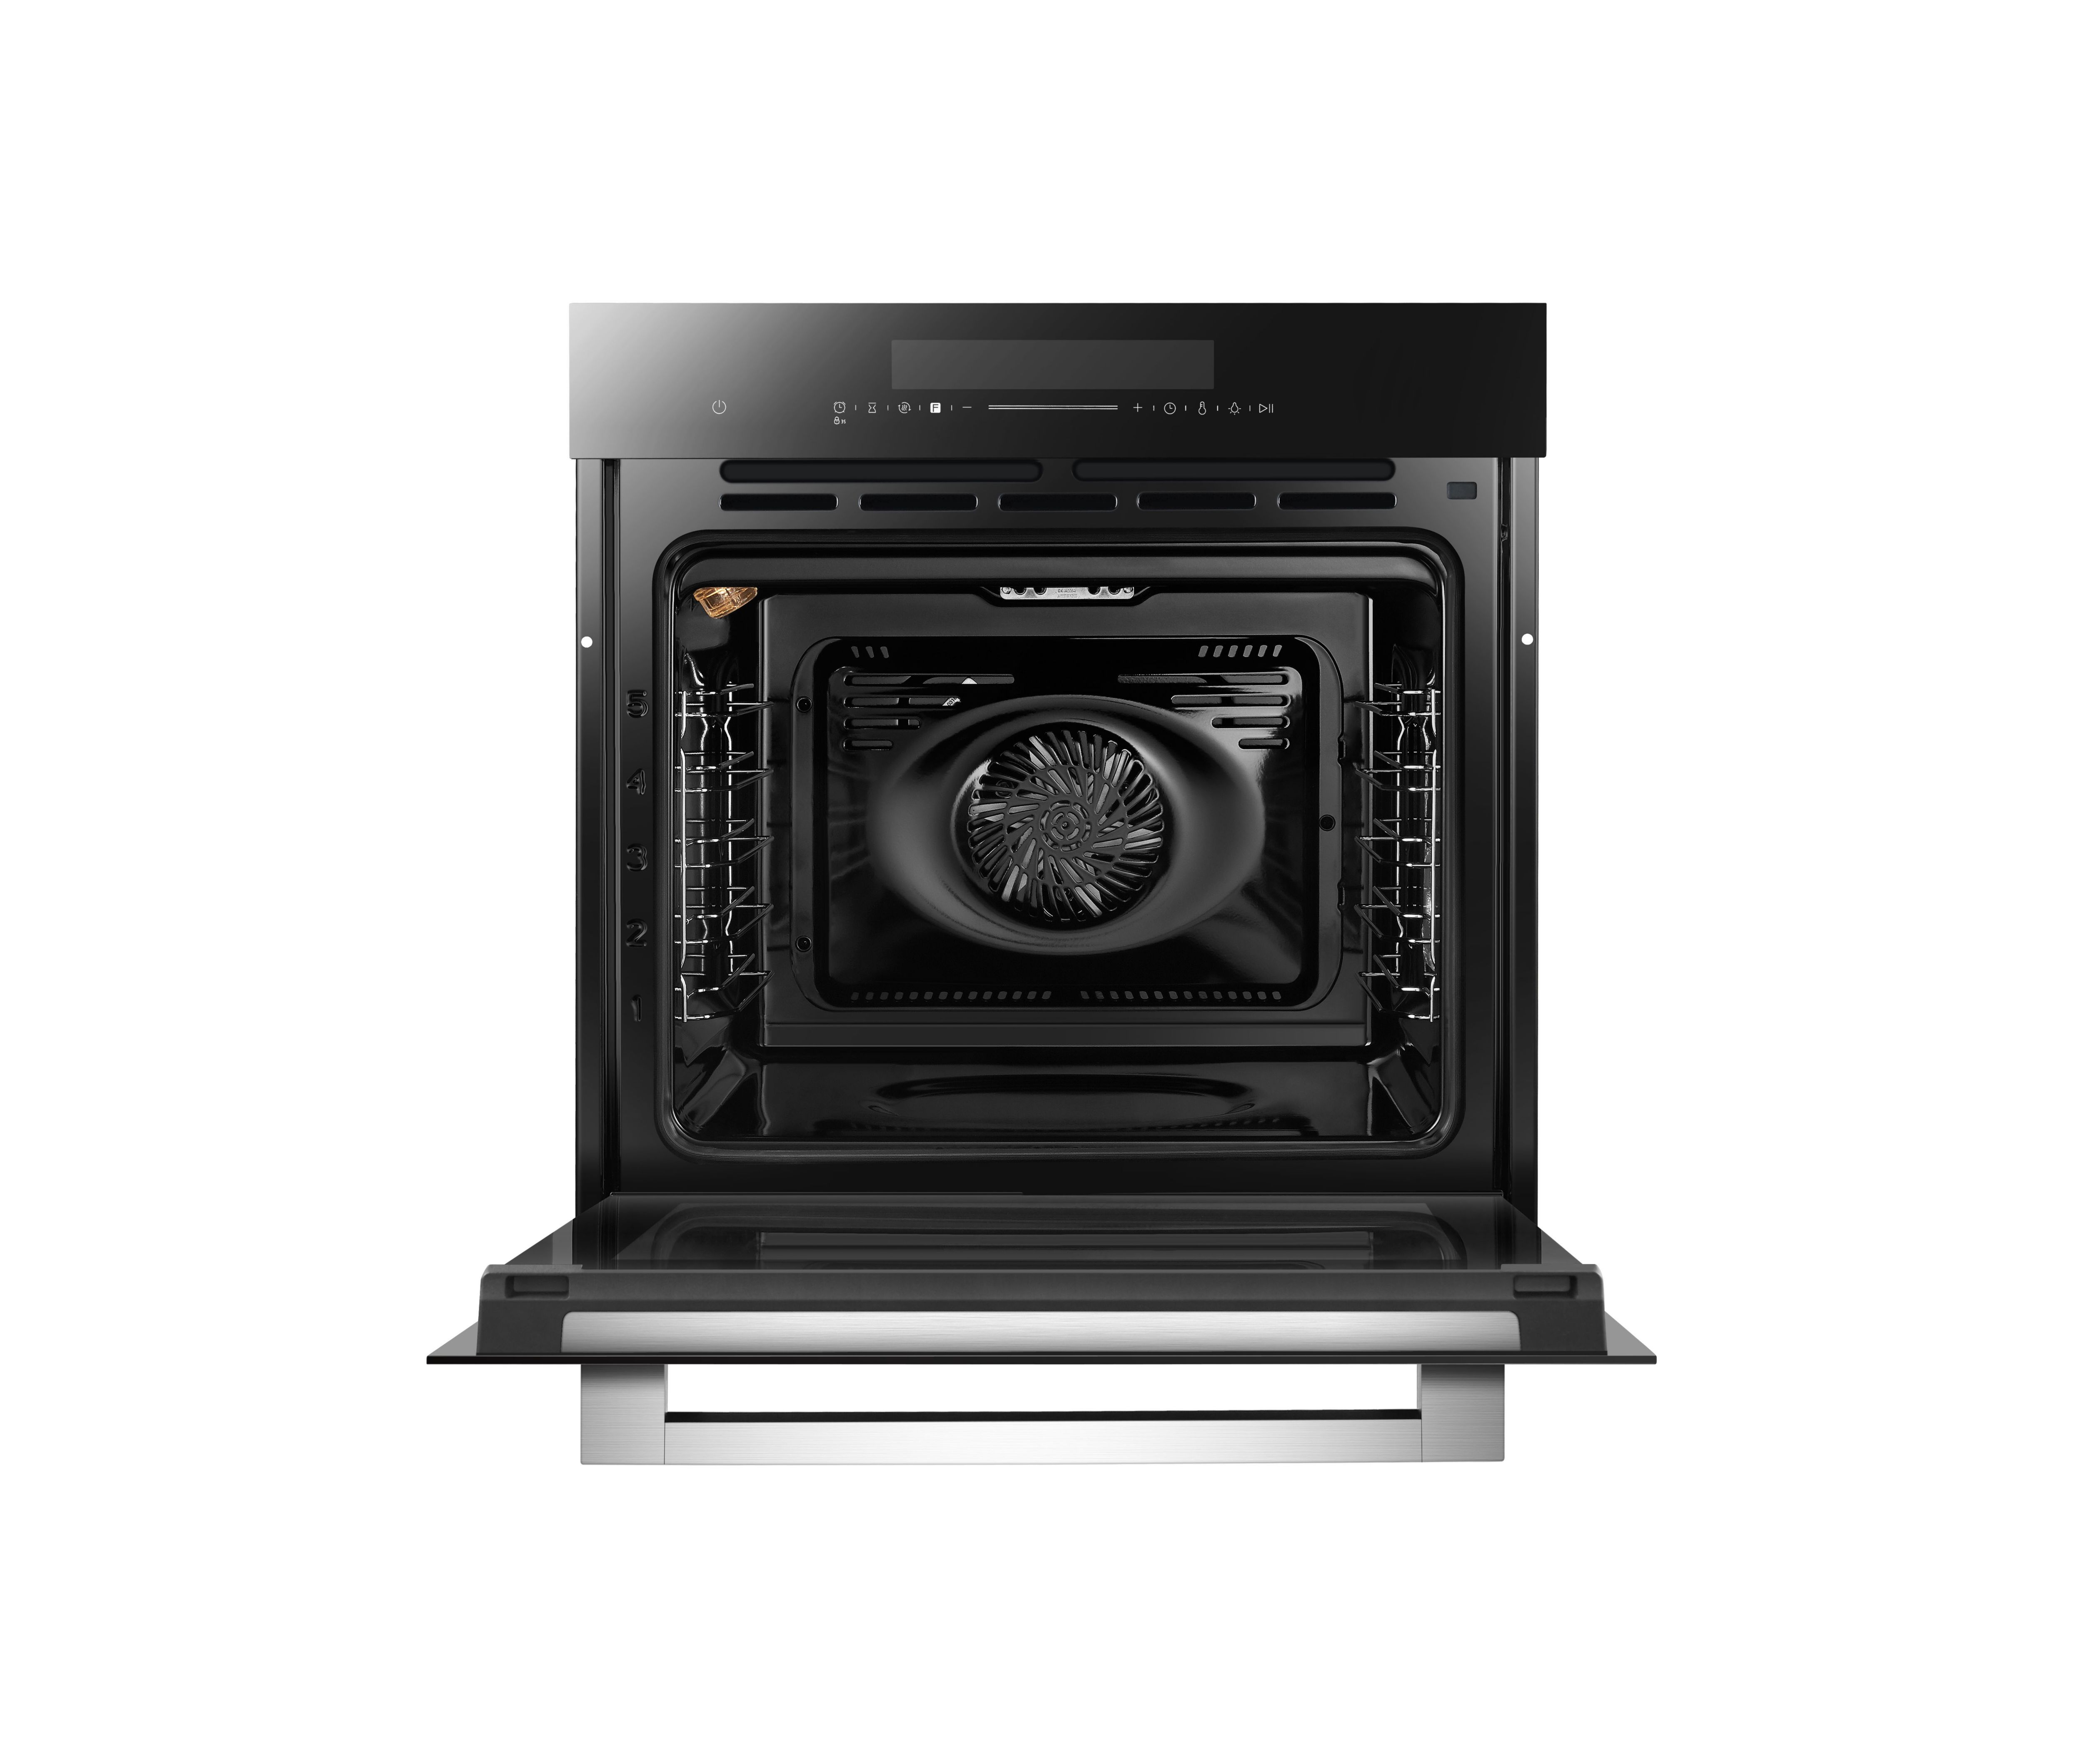 GoodHome GHMOVTC72 Built-in Single Multifunction Oven - Gloss black